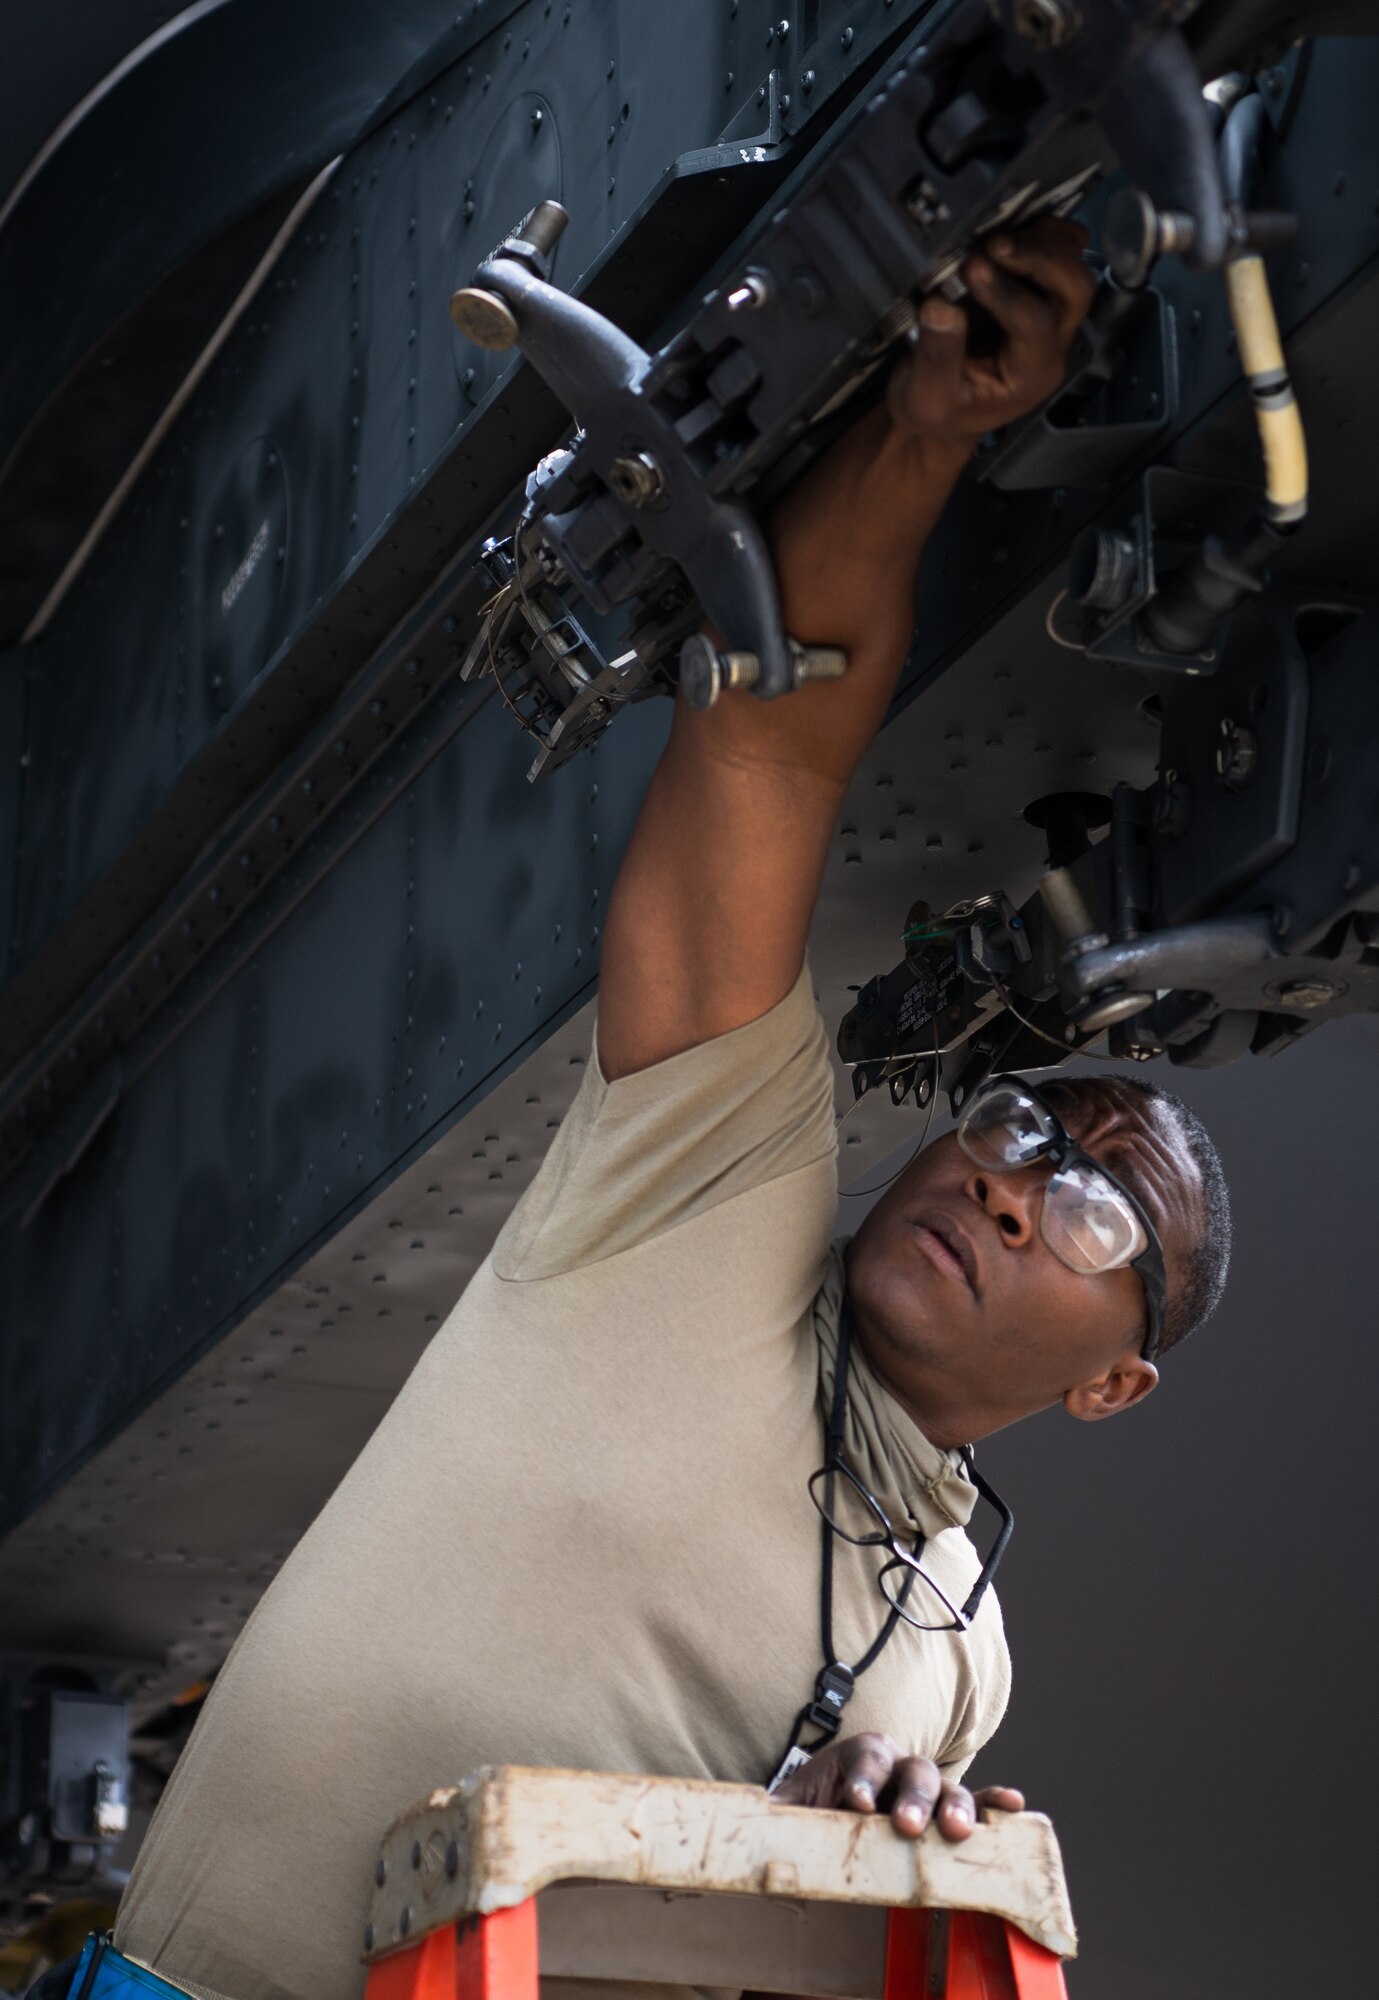 Senior Airman Christian X. Brewer, 2nd Aircraft Maintenance Squadron weapons load crew member, works on a B-52H Stratofortress munitions assembly unit during Combat Hammer at Barksdale Air Force Base, La., March 10, 2021. Participating in exercises like Combat Hammer is important for Airmen of the 2nd Bomb Wing because it allows all facets of the 2nd BW to get repetitions in generating combat power. (U.S. Air Force photo by Airman 1st Class Jacob B. Wrightsman)